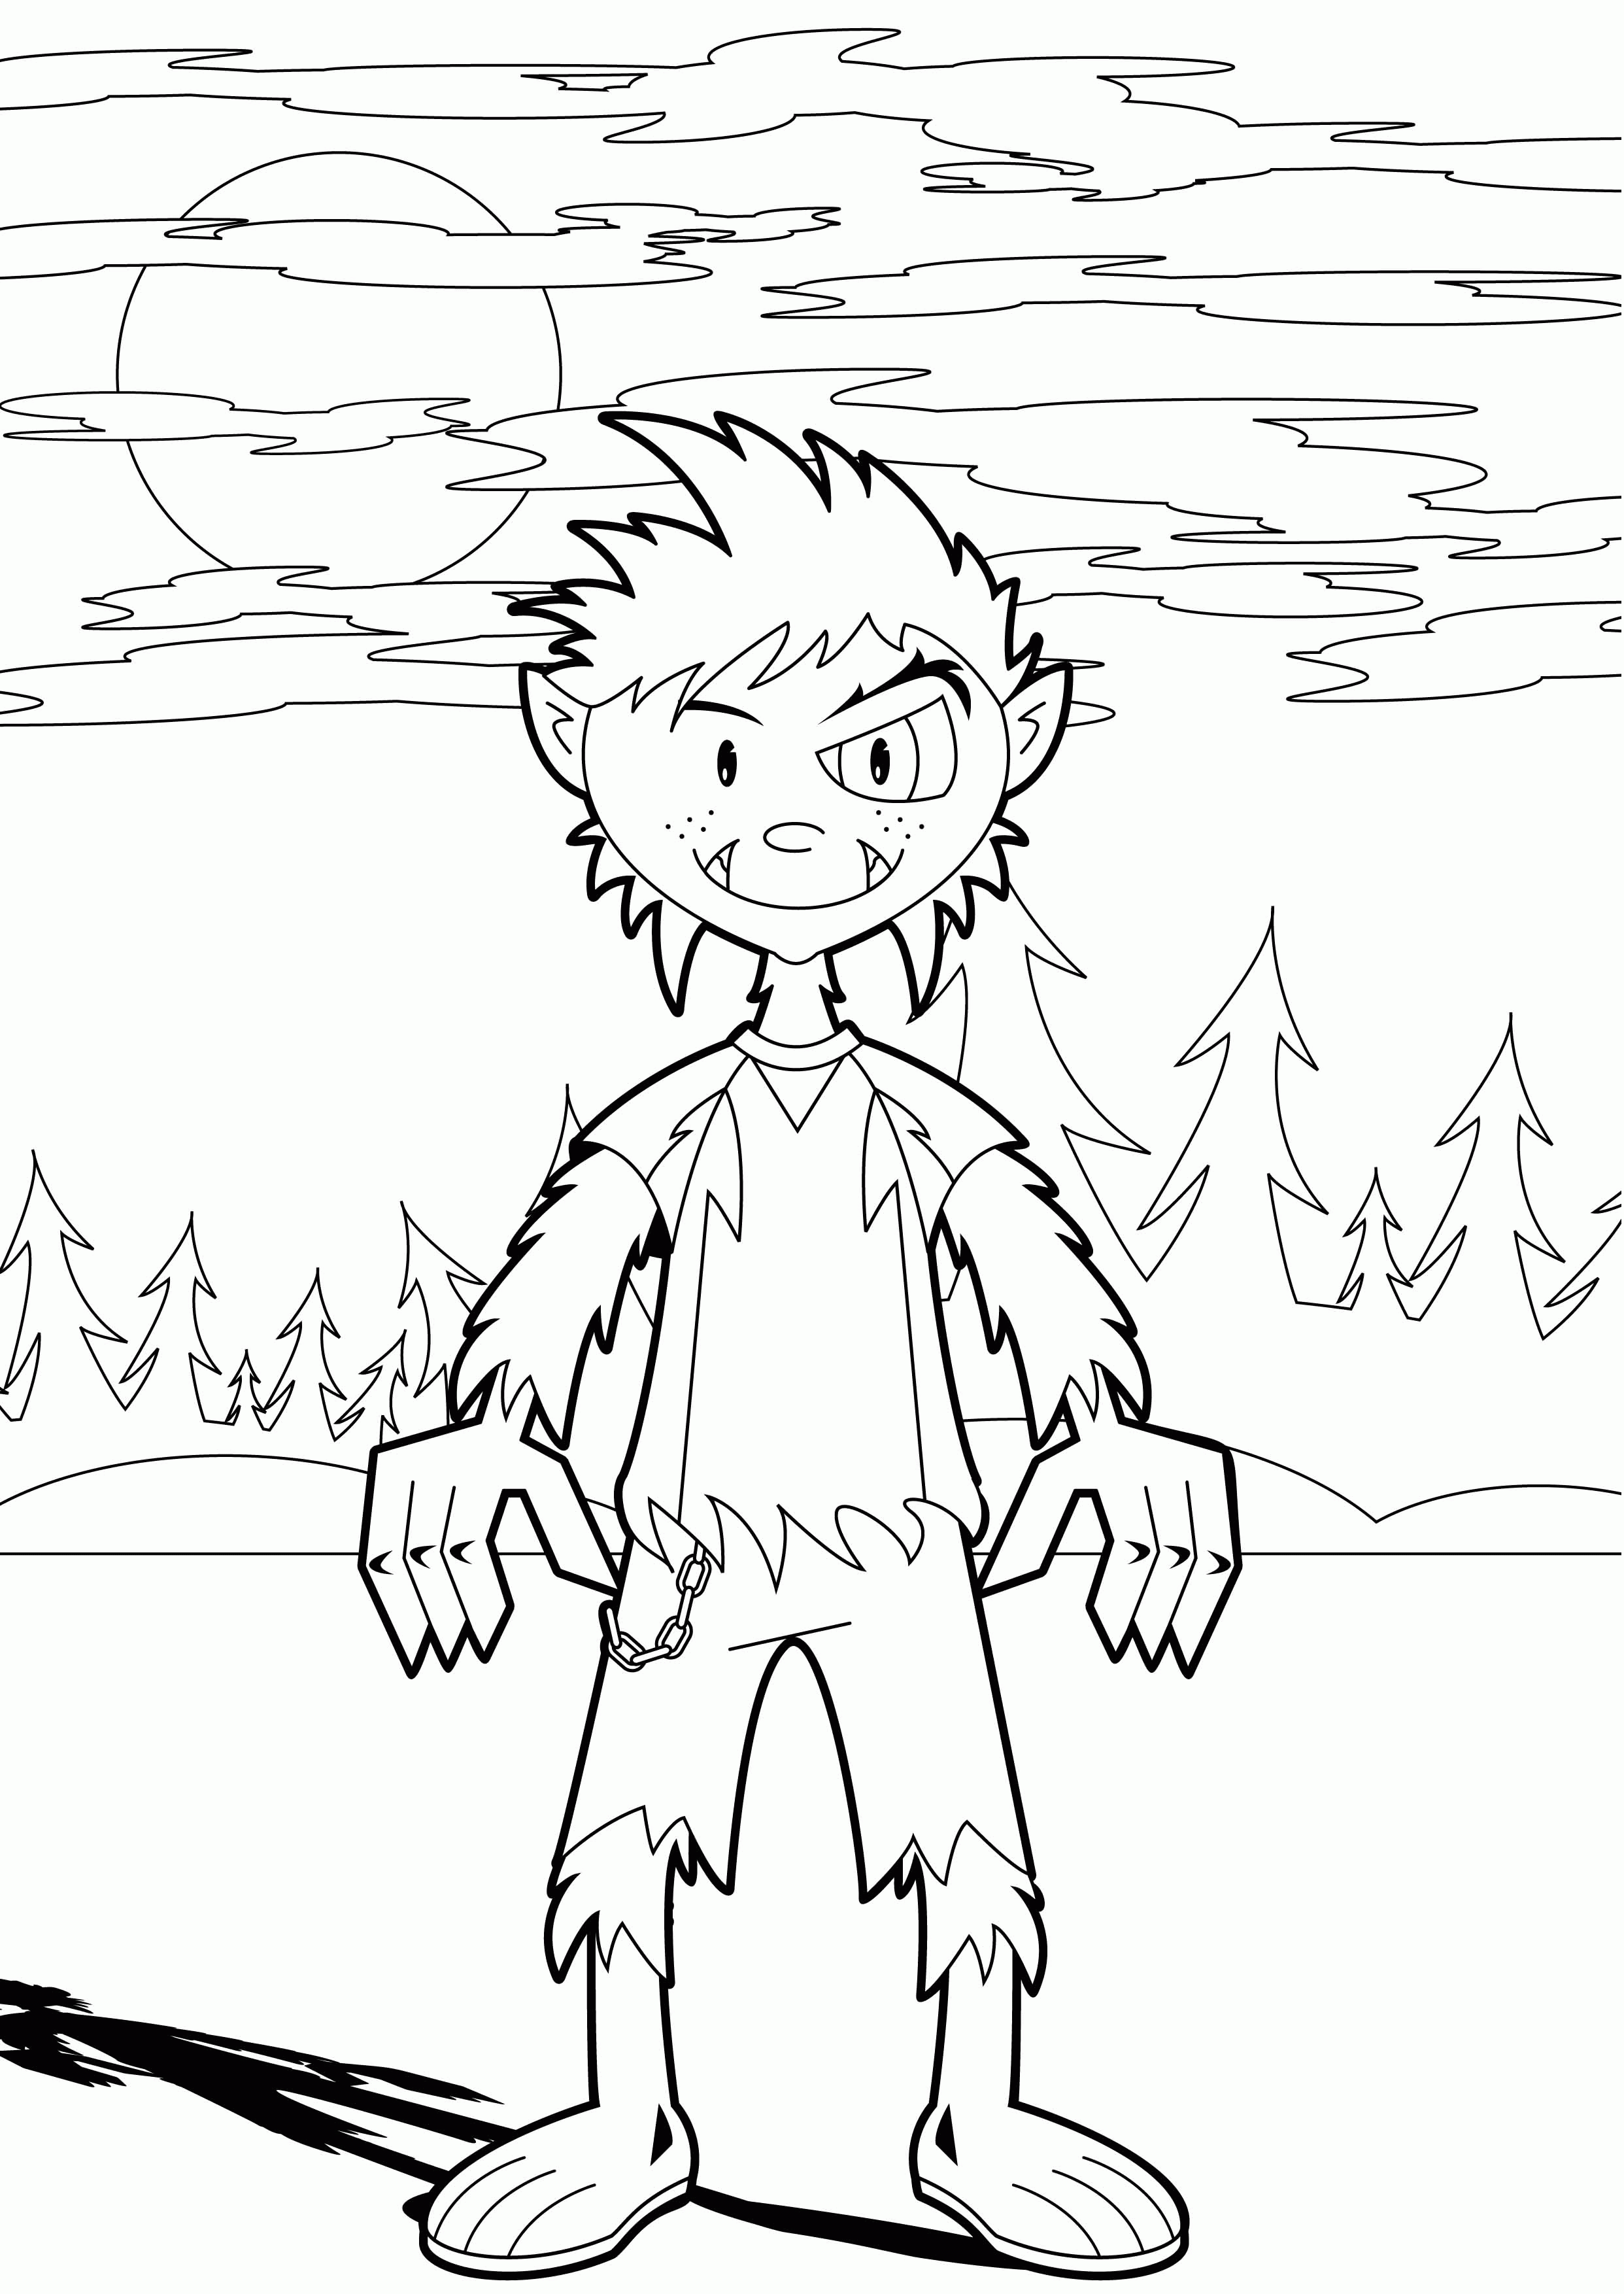 Free Werewolf Coloring Pages - Coloring Home